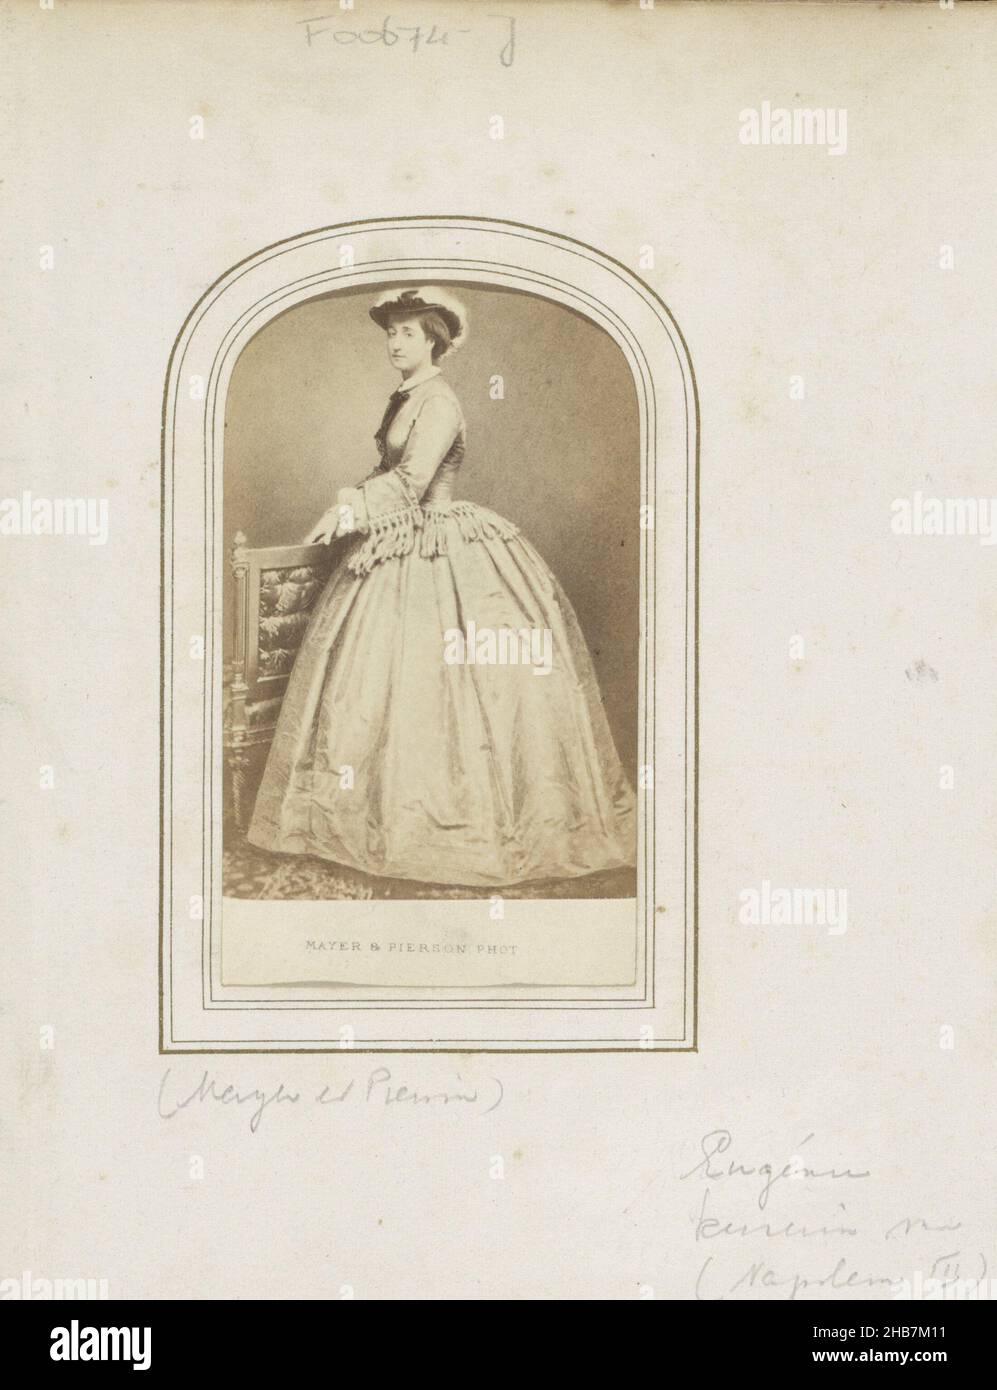 Portrait of Eugénie, Empress of France, wife Napoleon III, Part of Photo Album with 123 cartes-de-visite of members of European royal houses, politicians and well-known persons., Mayer & Pierson, Paris, 1855 - 1865, cardboard, paper, albumen print, height 88 mm × width 51 mm Stock Photo